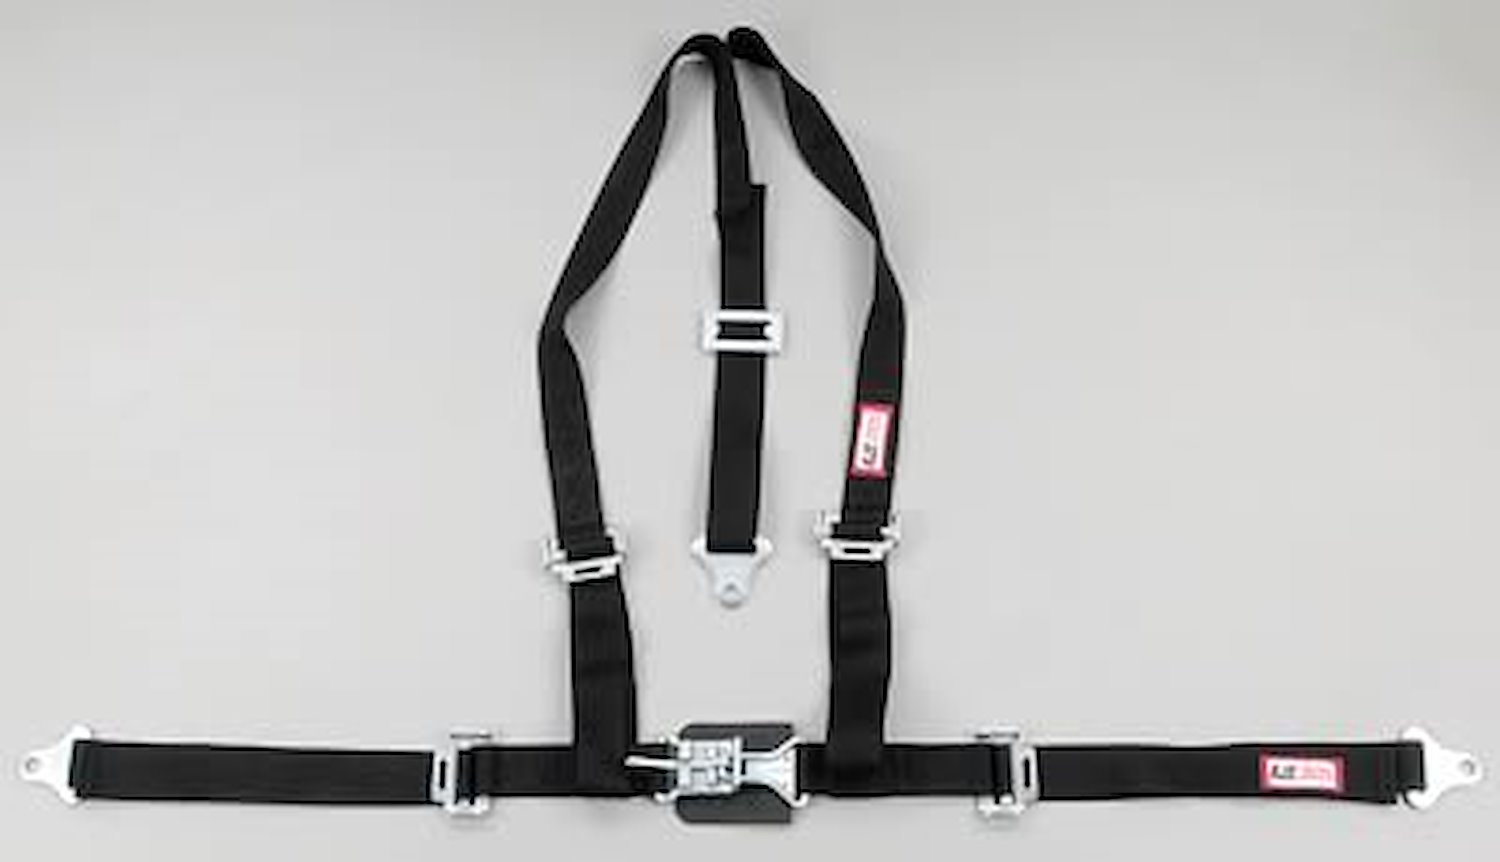 NON-SFI L&L HARNESS 2 PULL UP Lap Belt SEWN IN 2 S.H. V ROLL BAR Mount w/STERNUM STRAP ALL BOLT ENDS BLACK